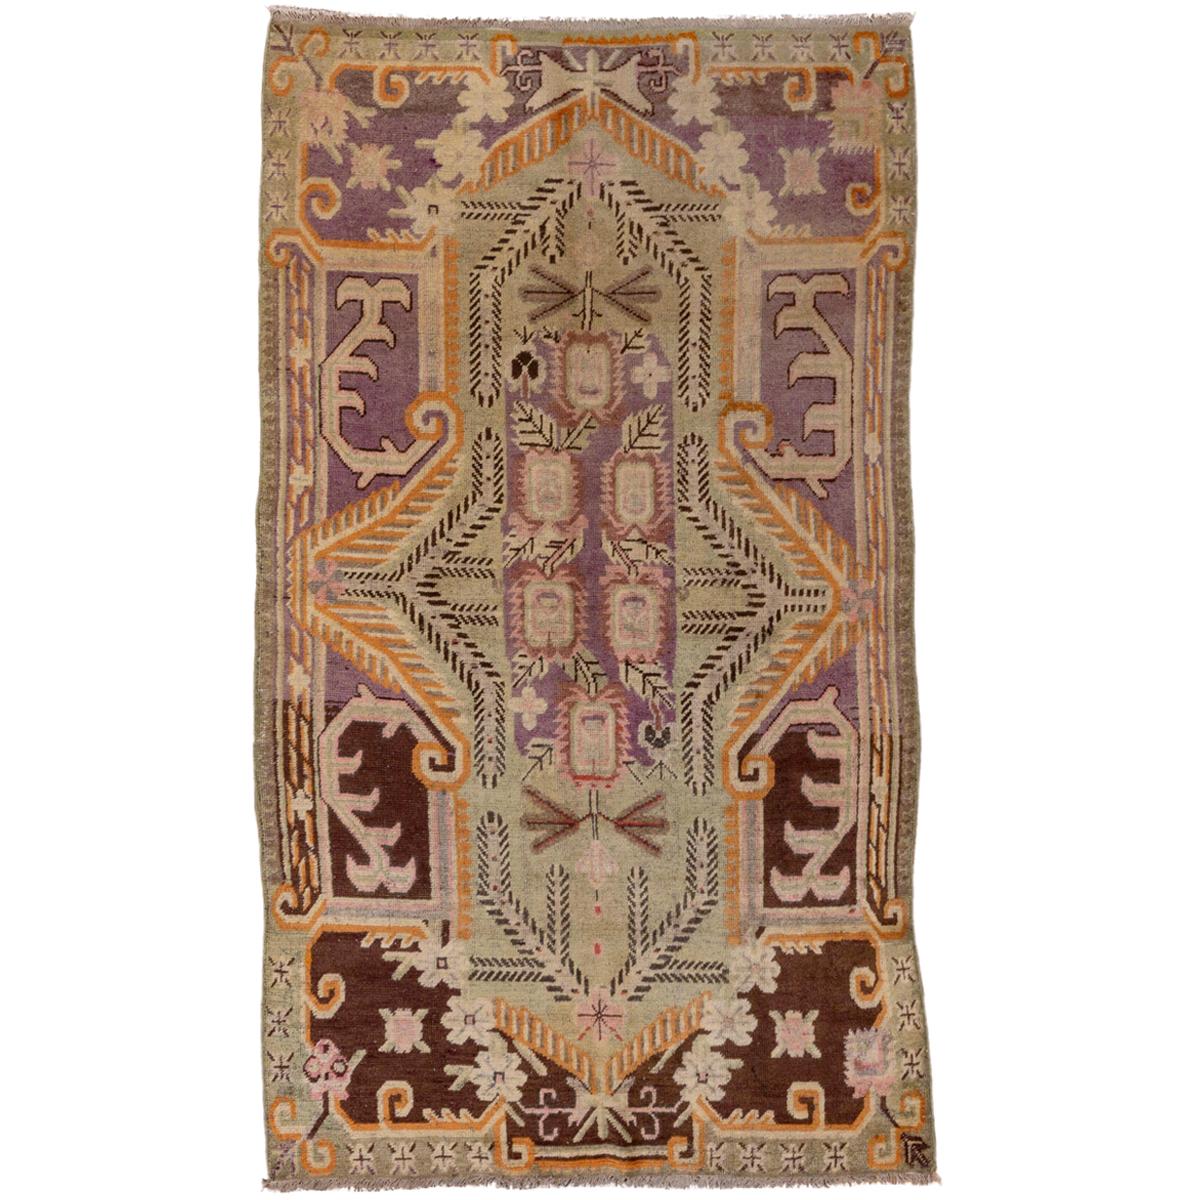 Antique Khotan Rug, Purple and Brown Outer Field, Green Borders, circa 1920s